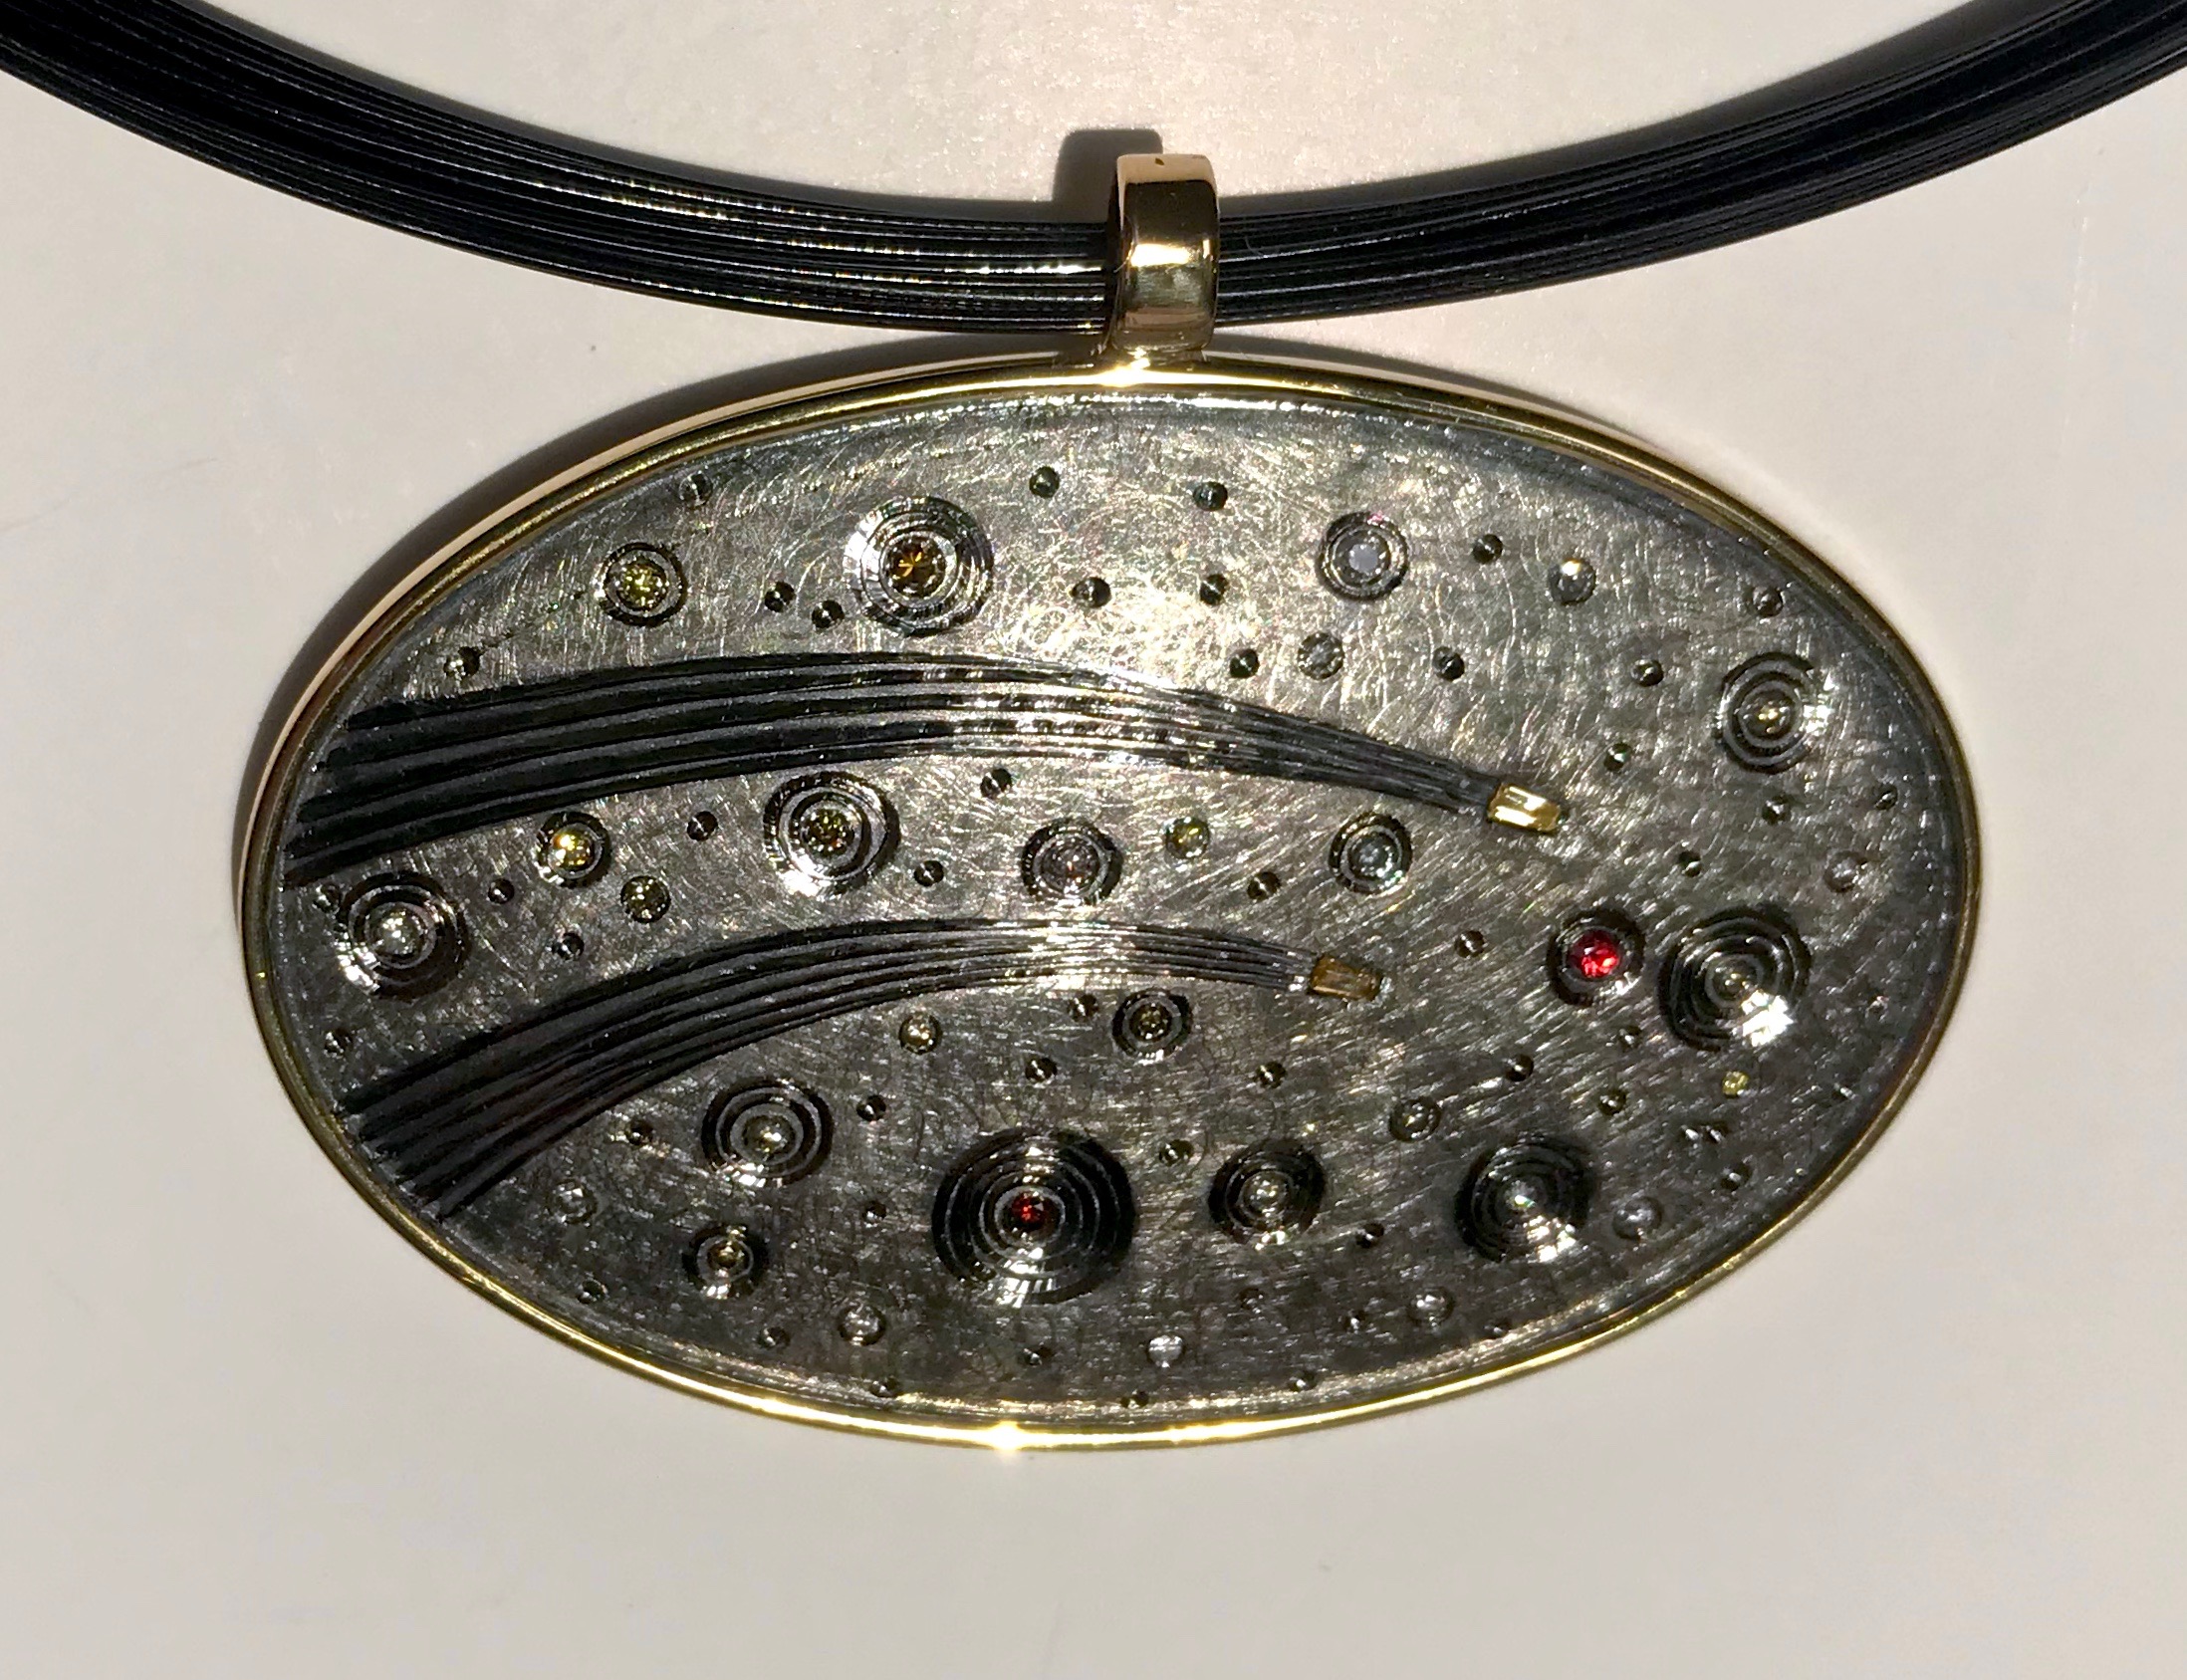 <a href="/node/290">Two Comets. Recent Commission 50 th wedding anniversary / pendent drop 18ct gold / Silver / hand engraved / set with various coloured diamonds /finished in black Rhodium plate</a>